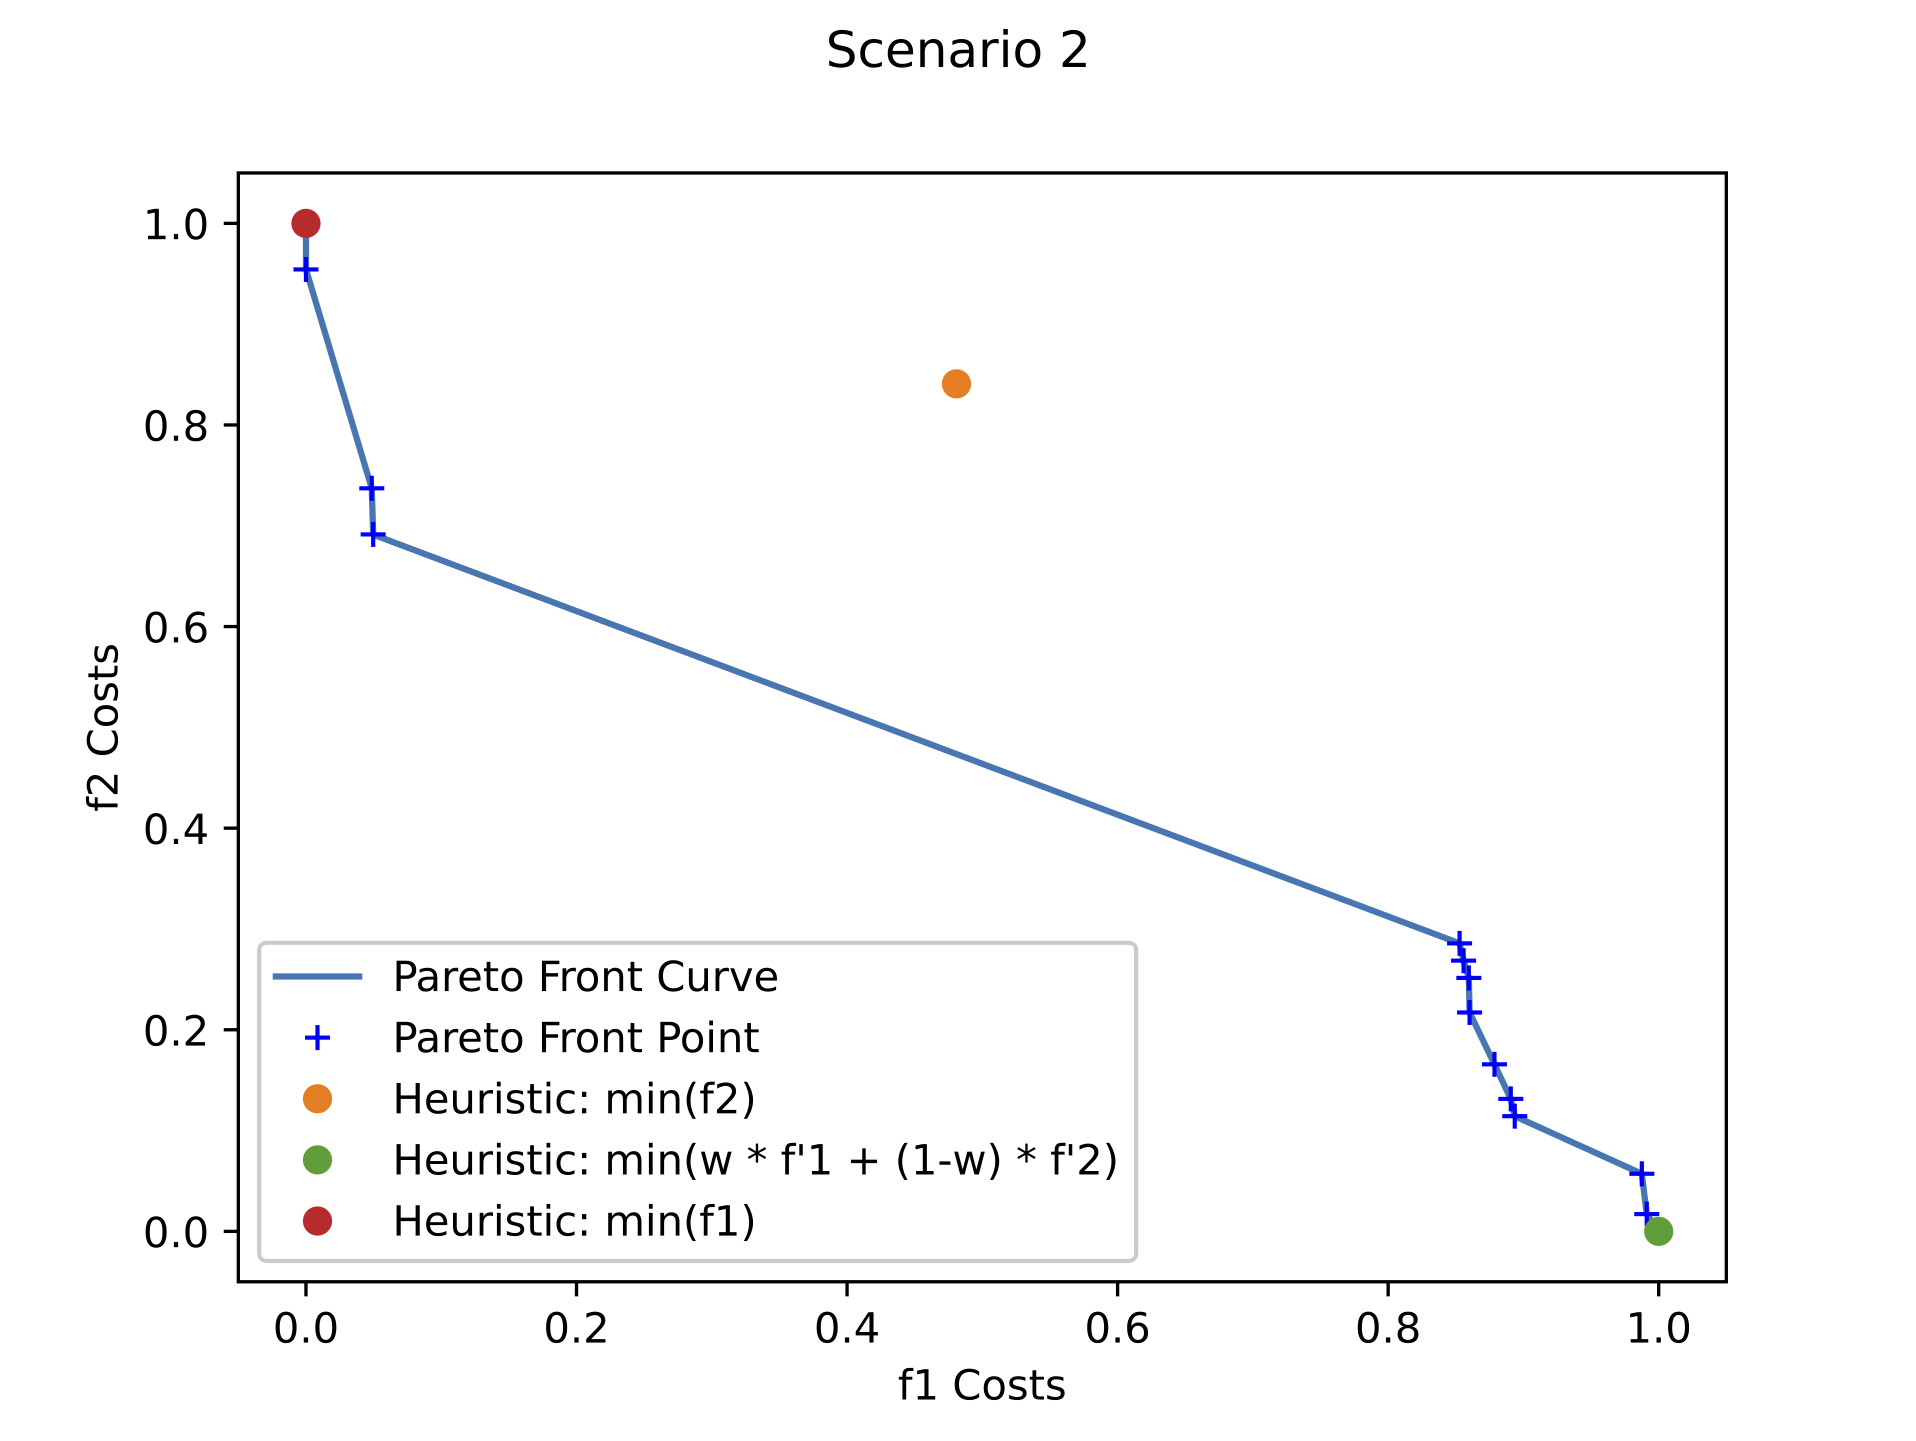 Pareto Fronts and Heuristic solutions for Scenario 2.